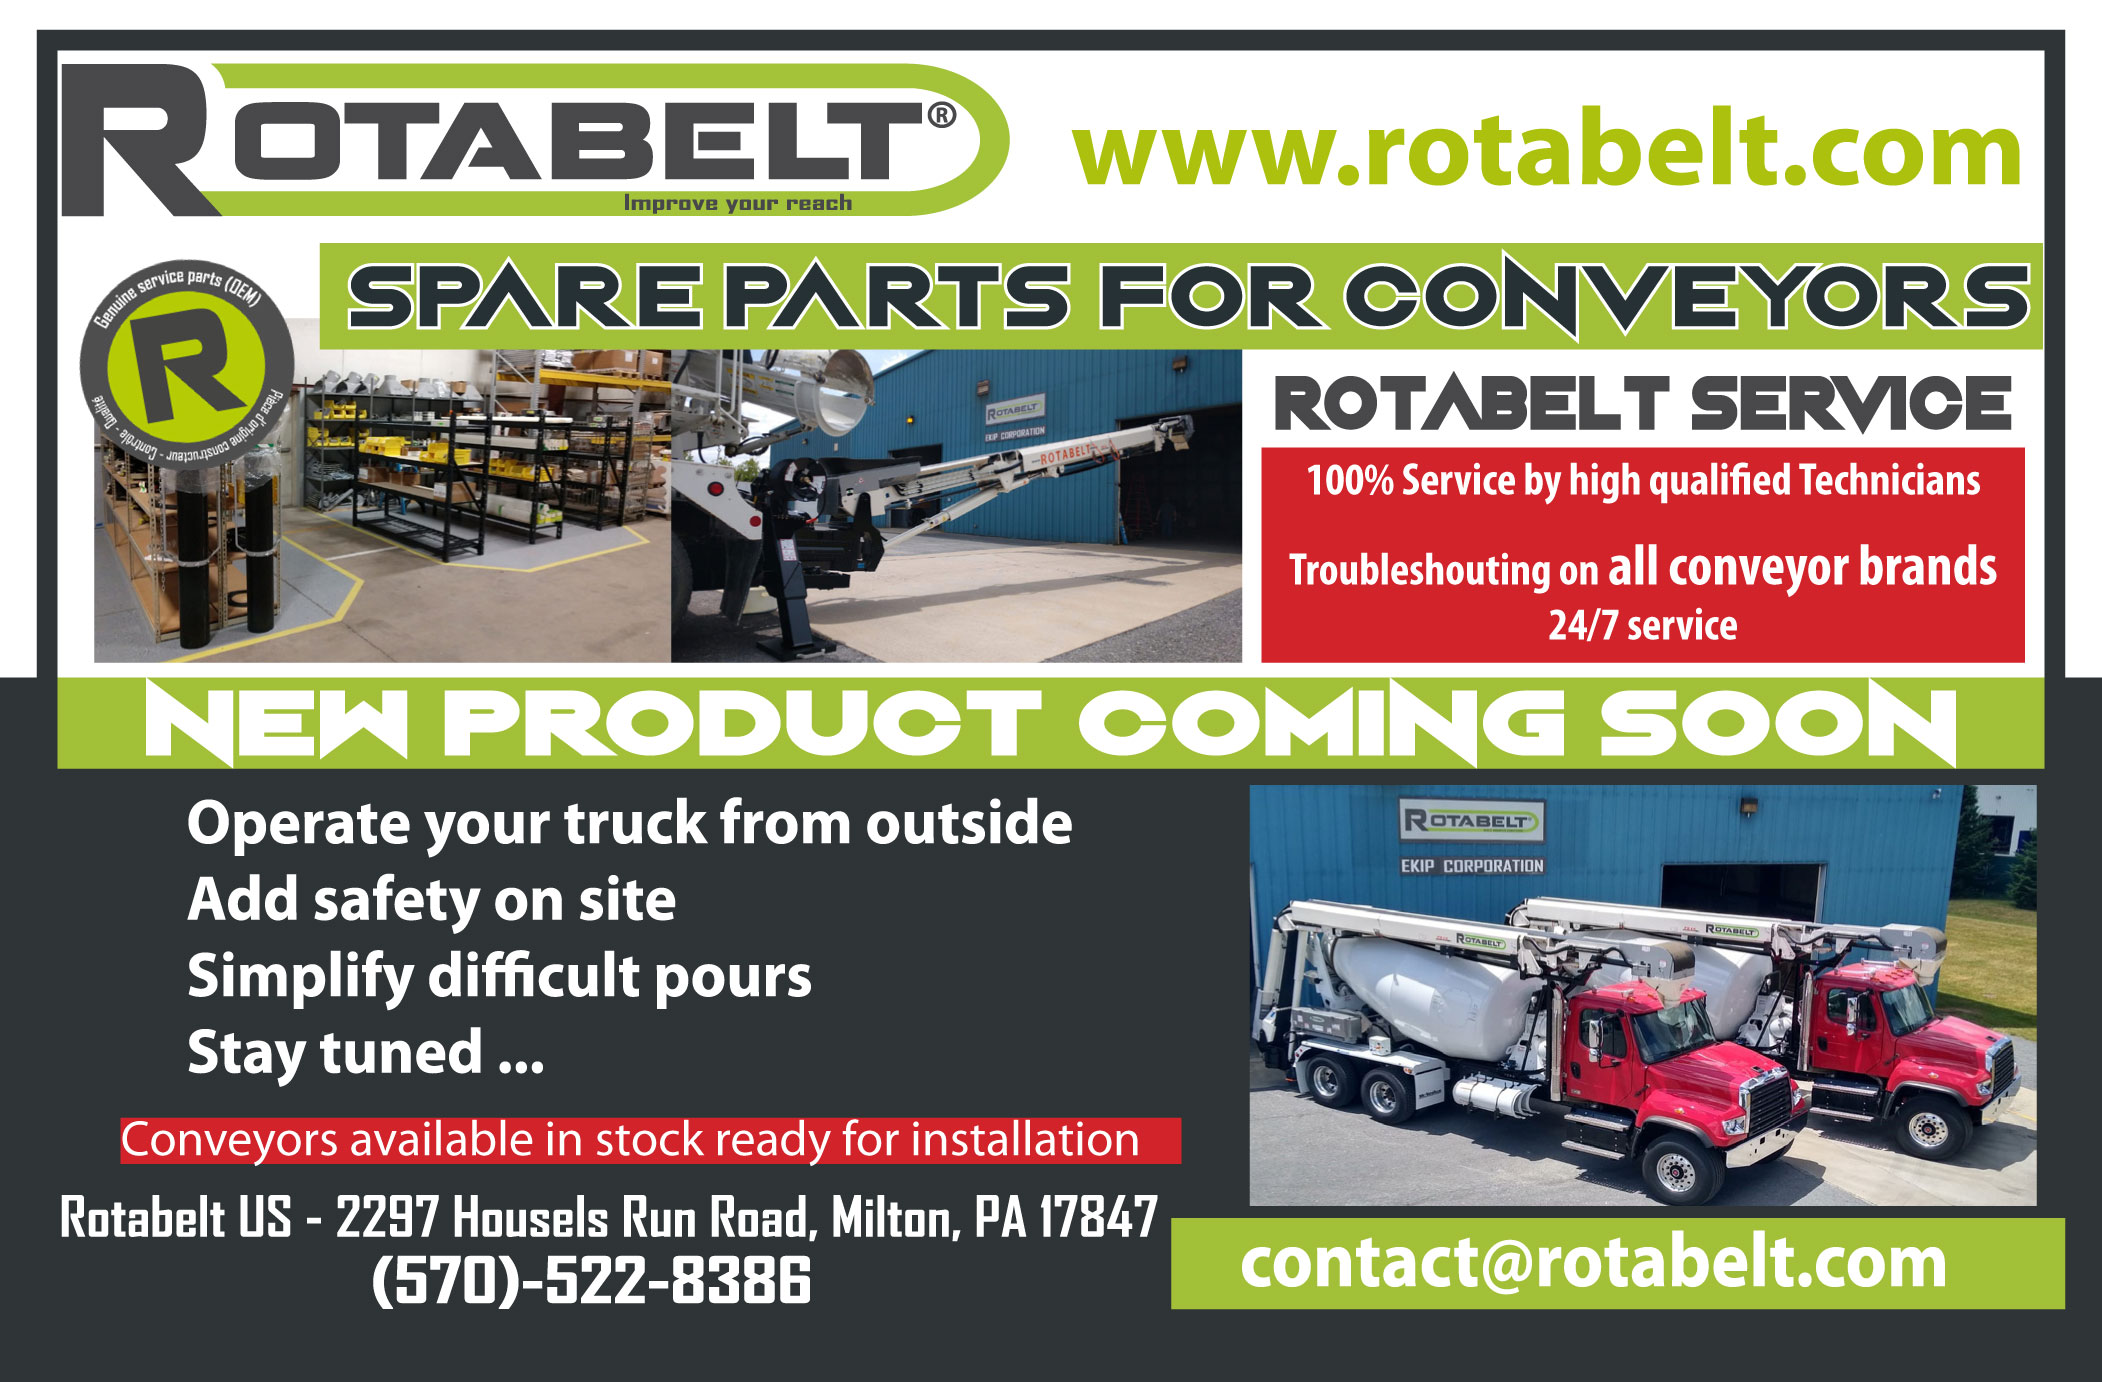 Concrete Product ad on parts and new conveyors